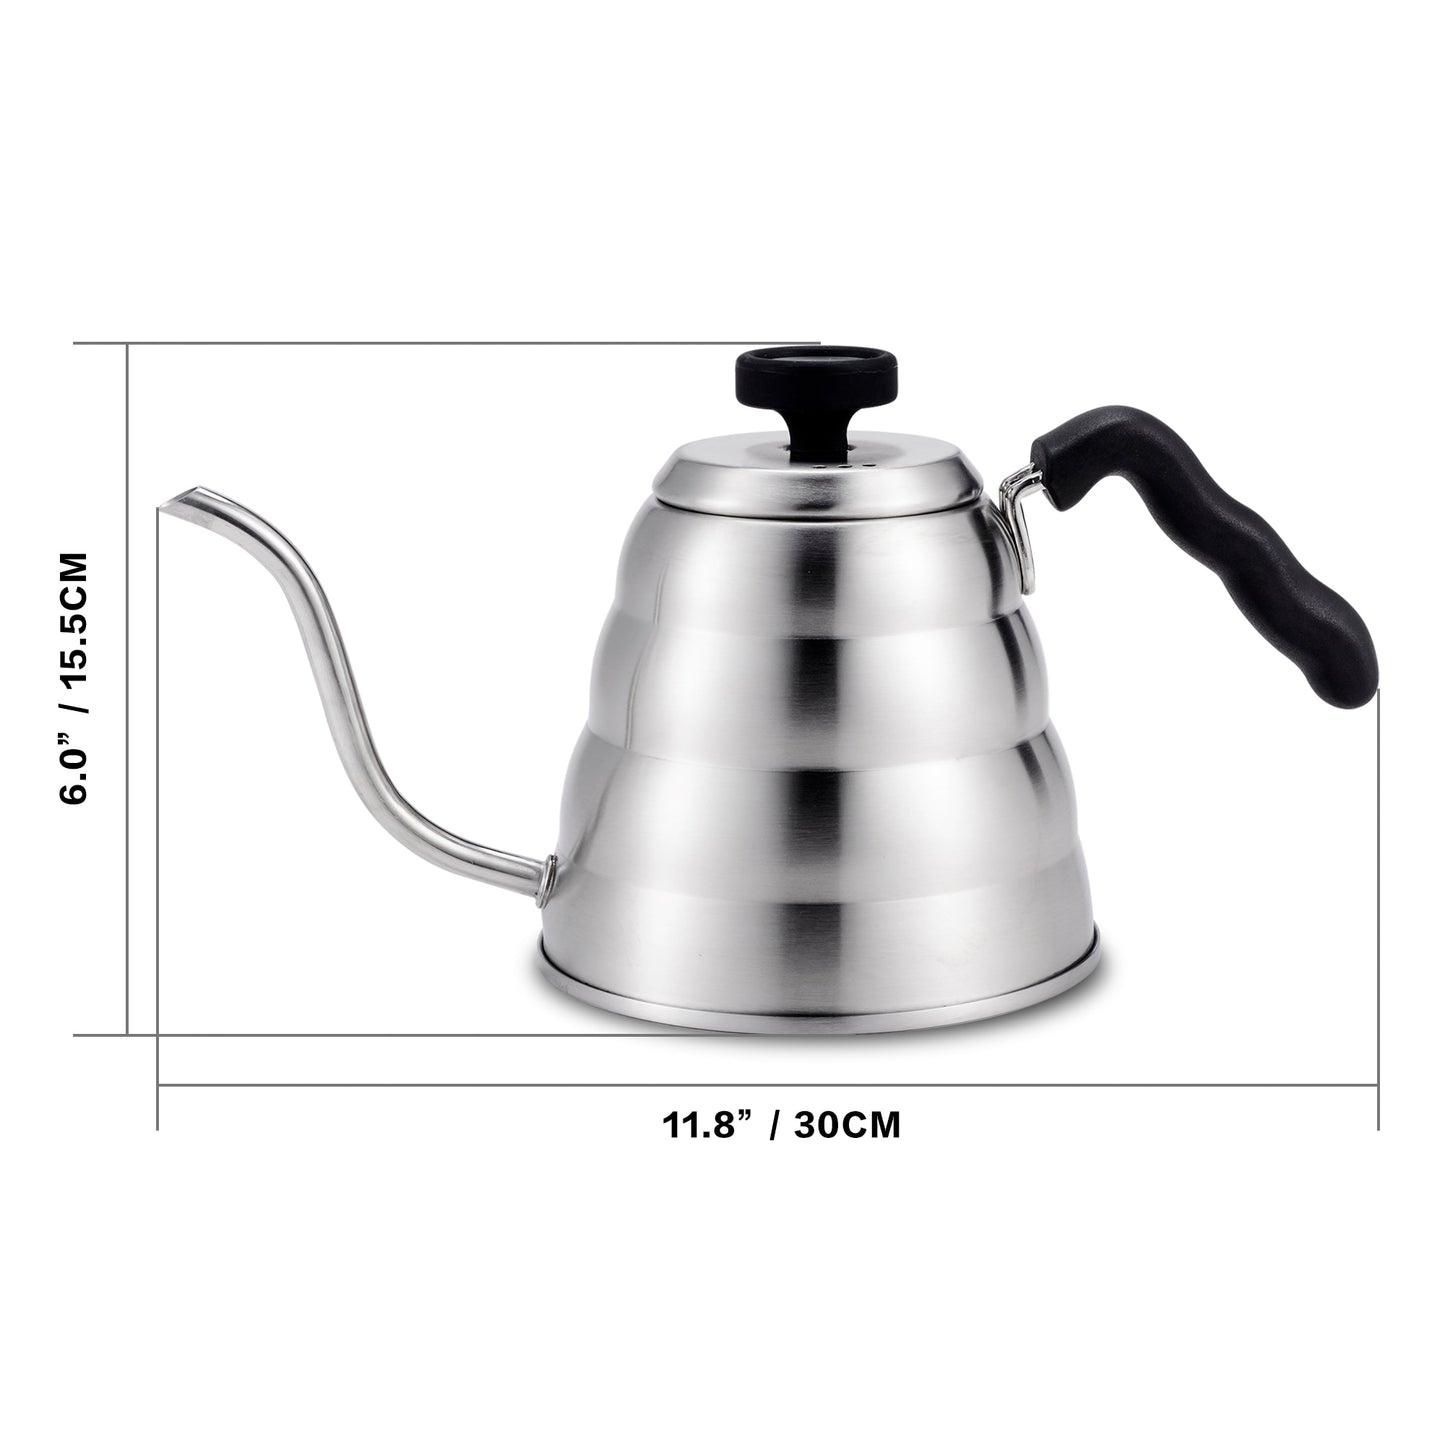 40oz/1.2L Stainless Steel Coffee Kettle with Thermometer, Gooseneck Thin Spout for Hand Drip Pour Over Coffee Tea Pot Teapot